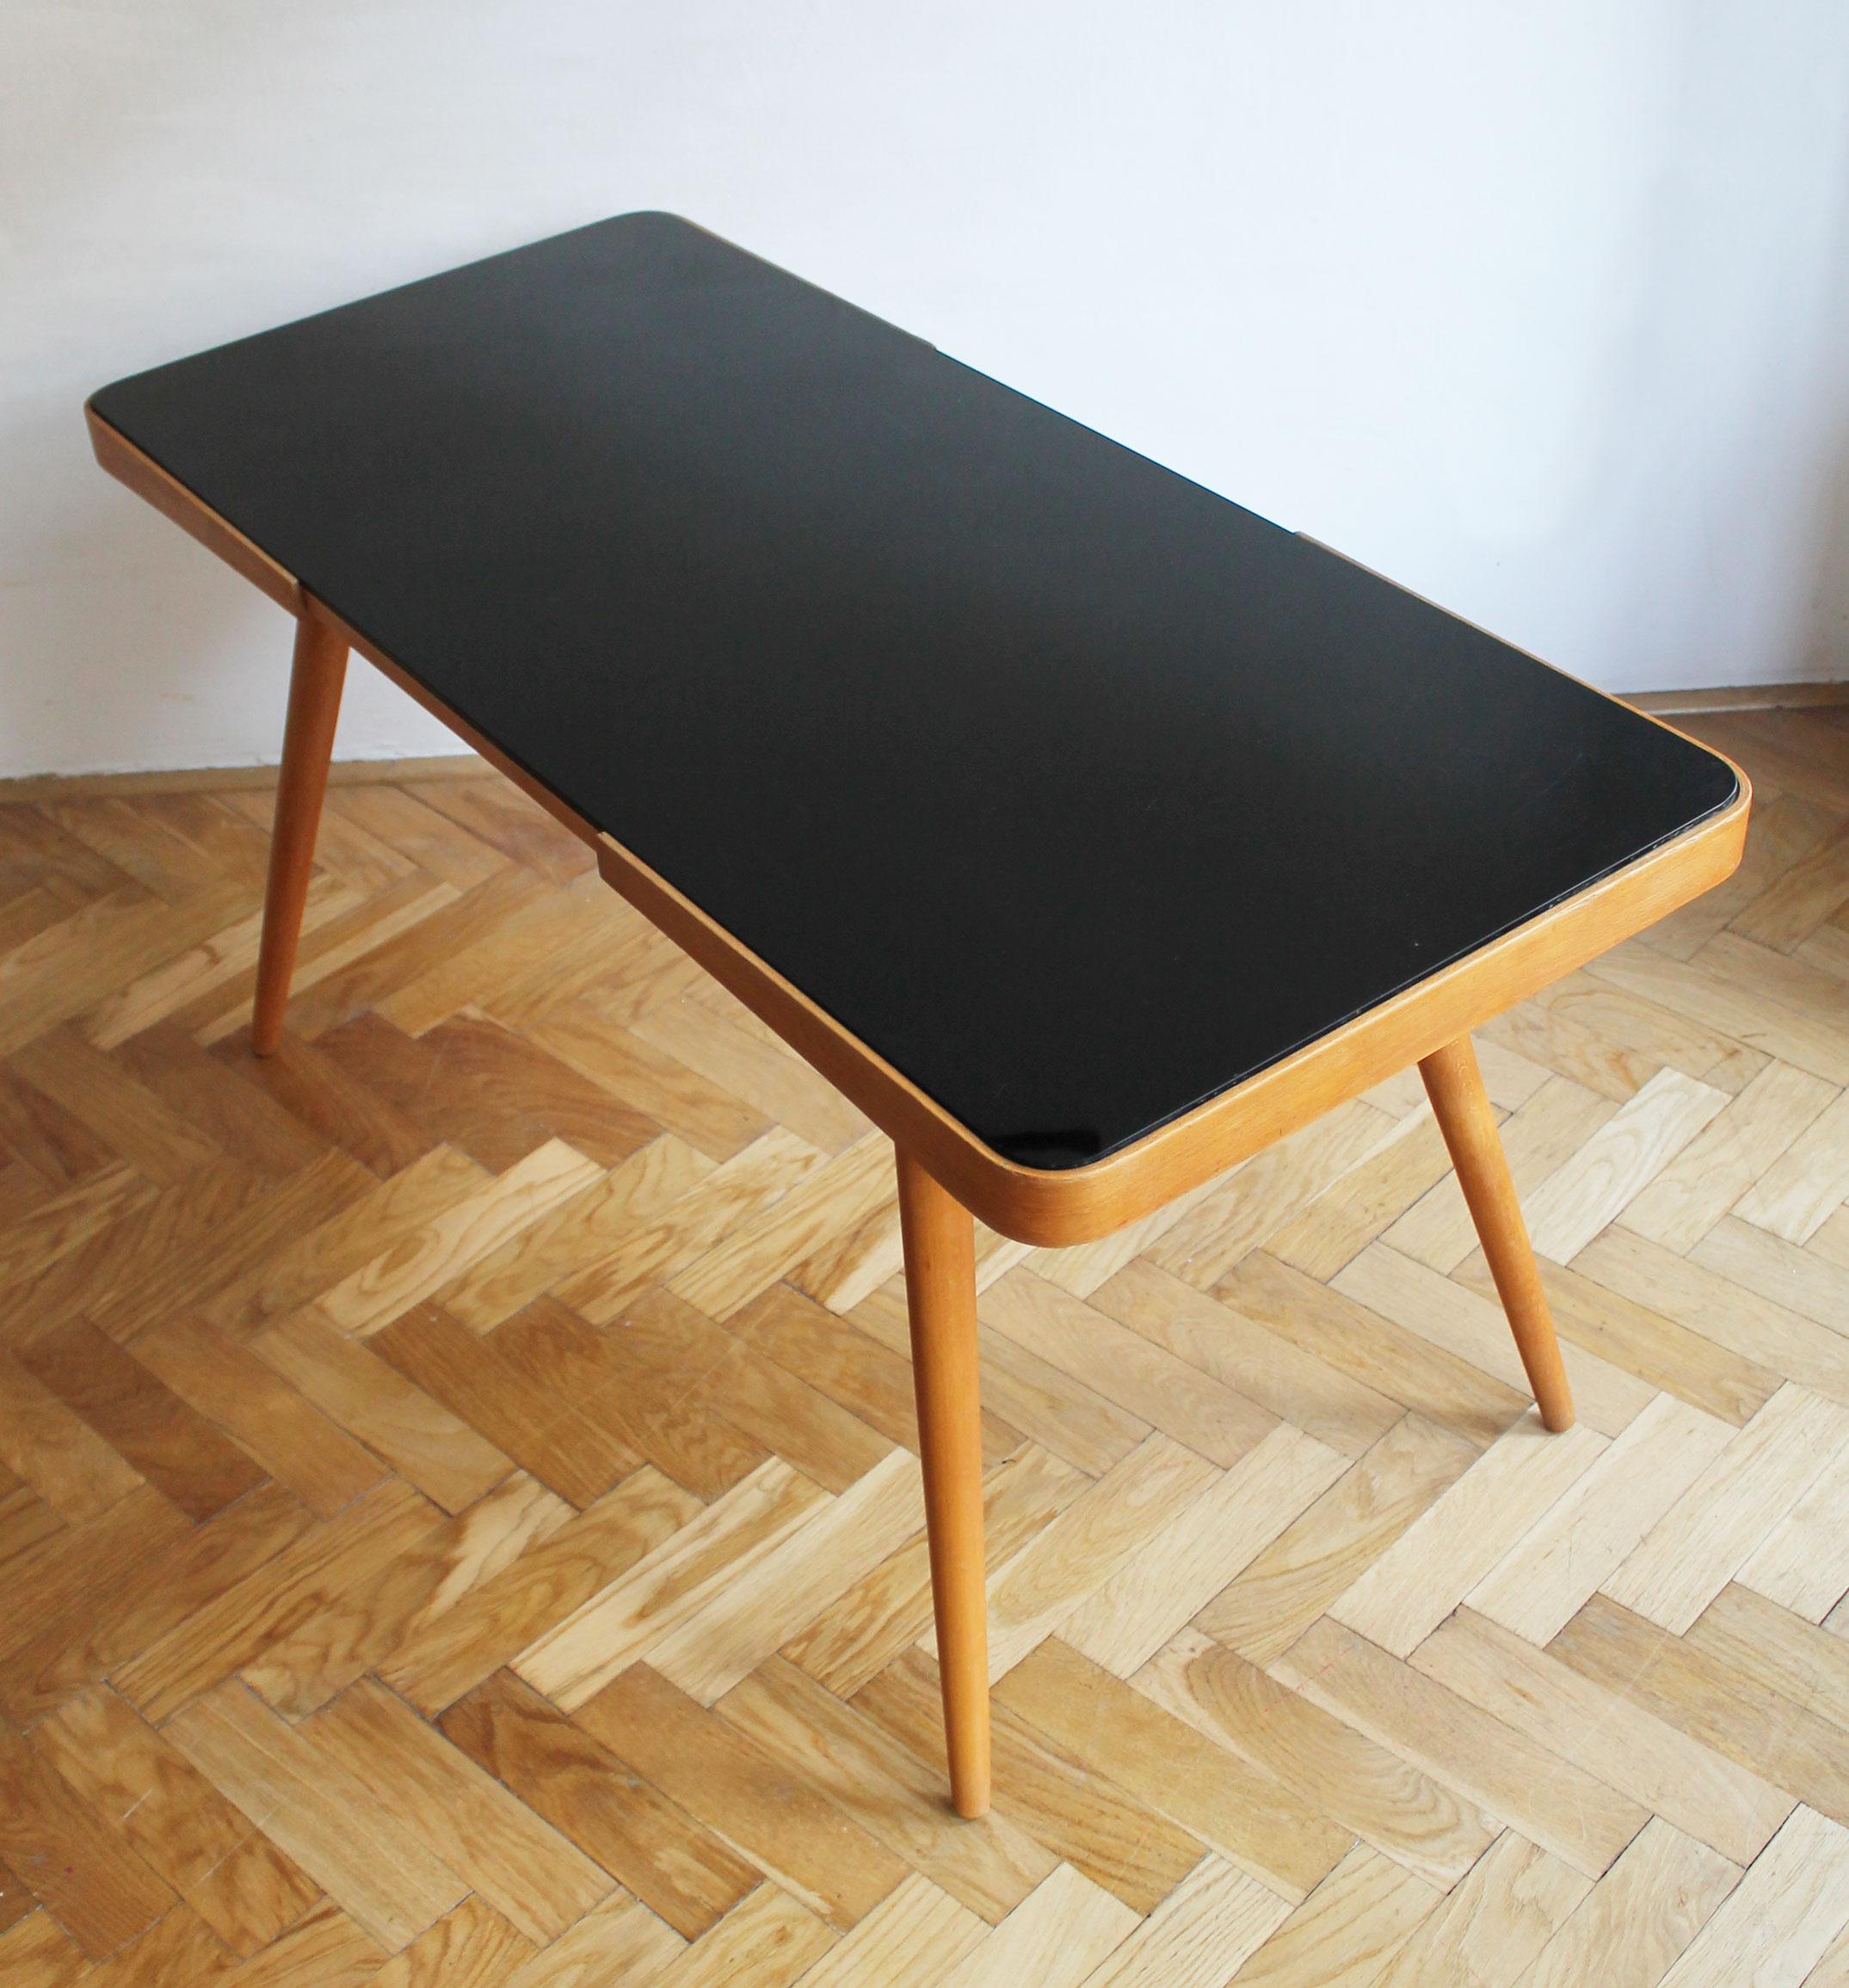 1960's Mid Century Coffee Table With a Black Opaxite Glass In Fair Condition For Sale In Brno, CZ